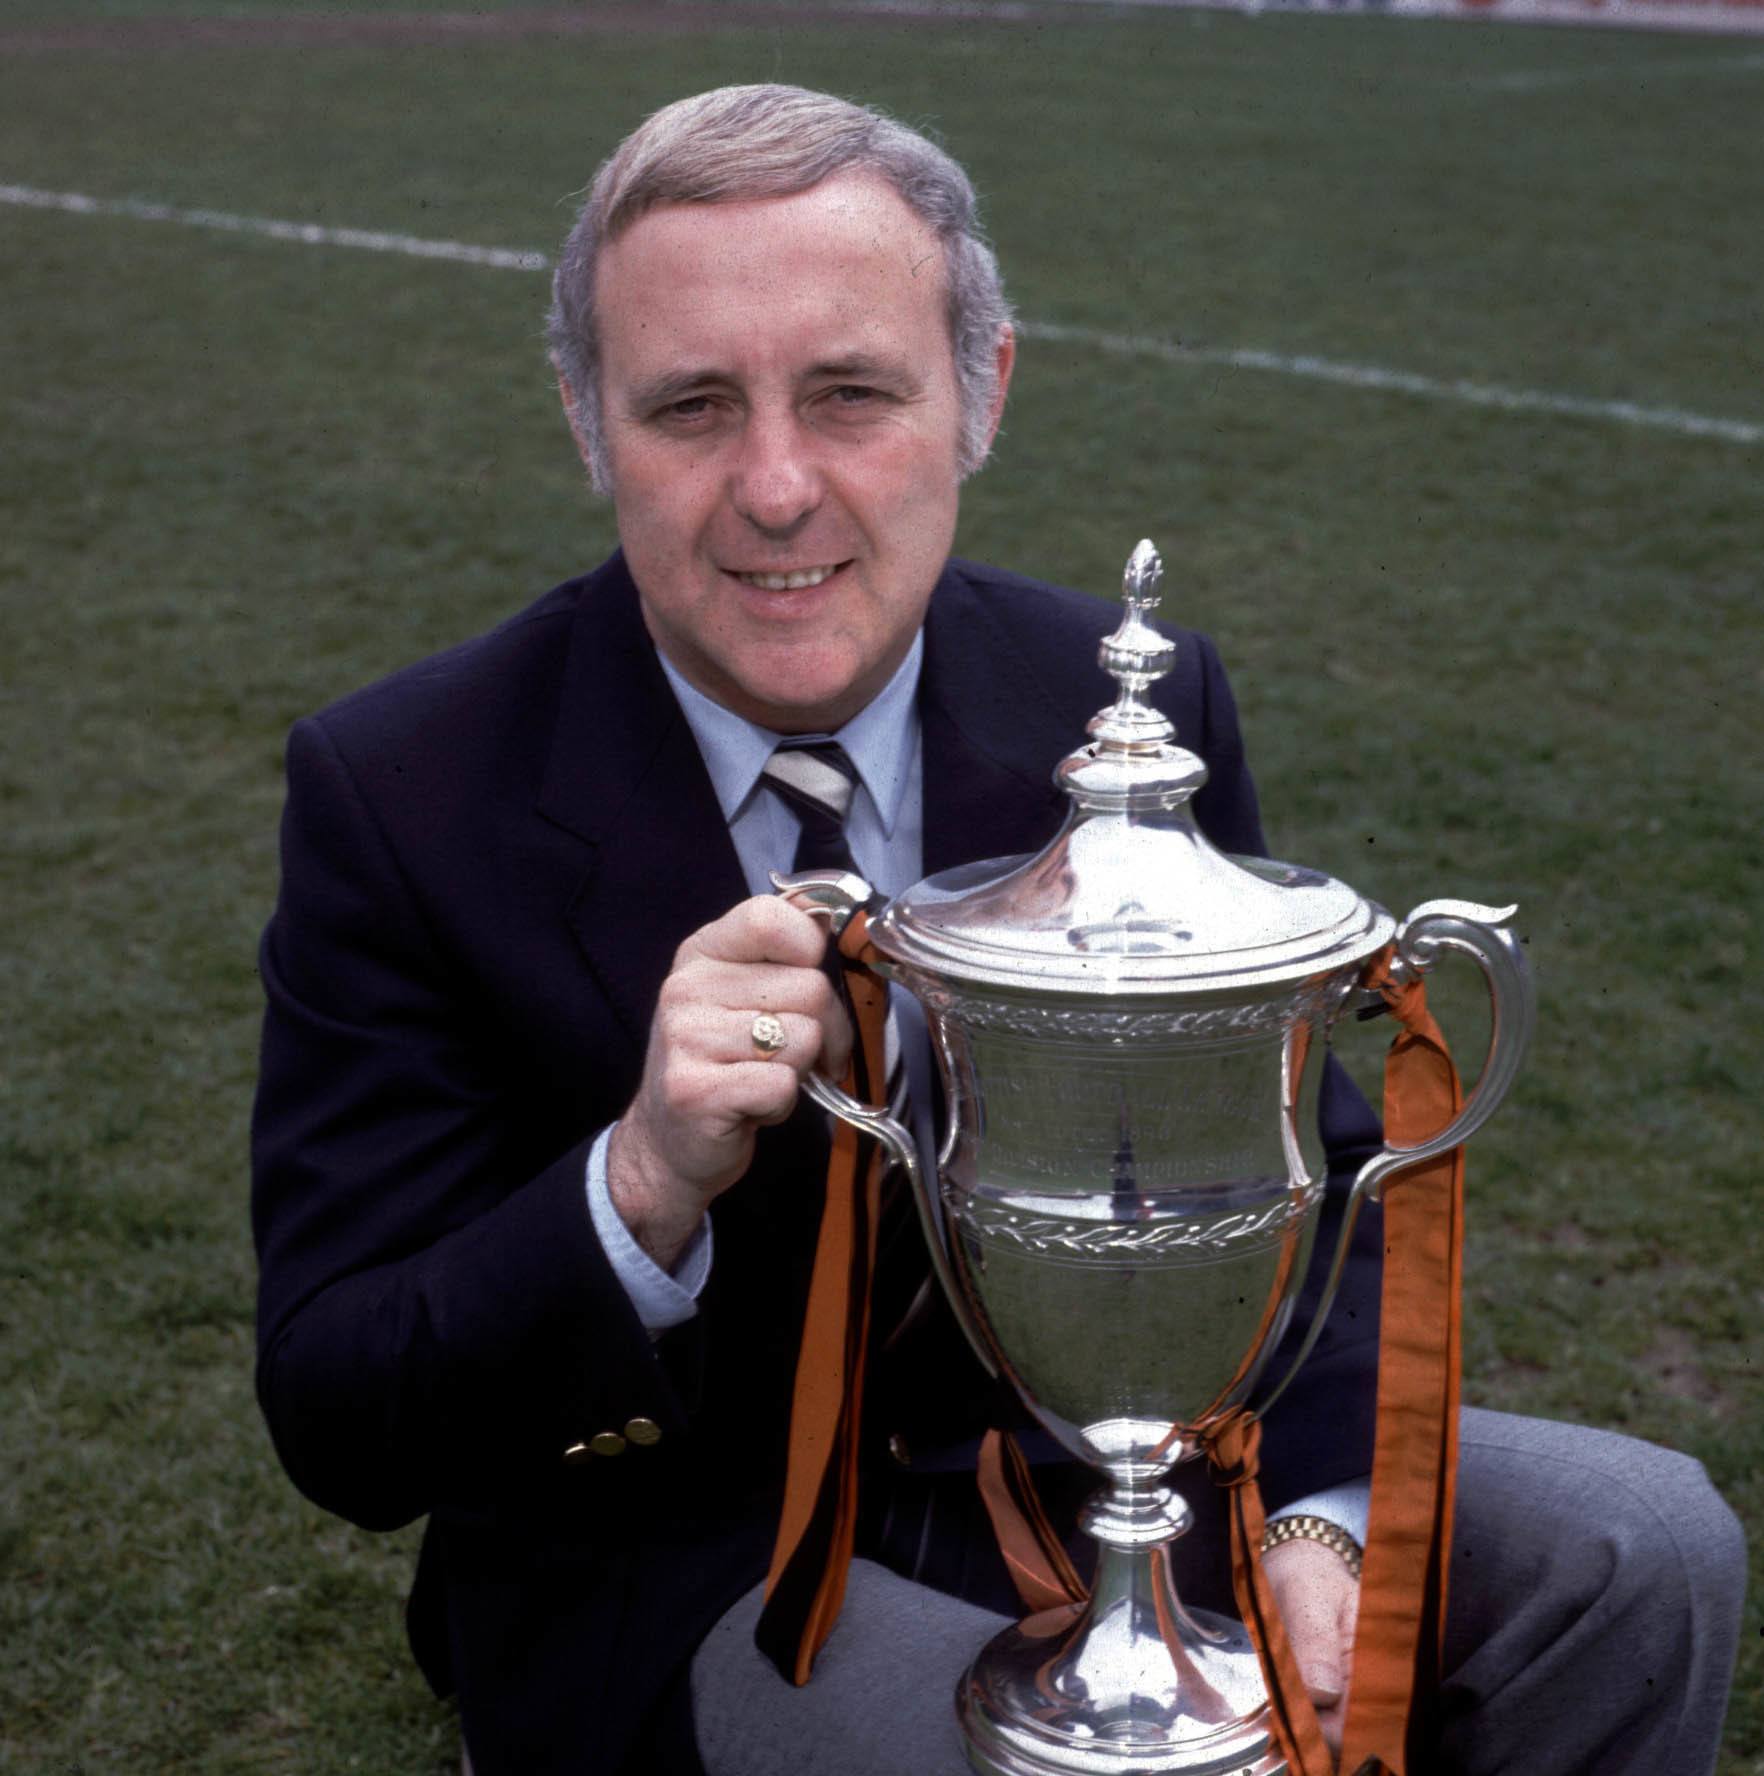 SEASON 1982/1983 Dundee United's manager, Jim McLean sits proudly with the Premier Division trophy which United won that season.